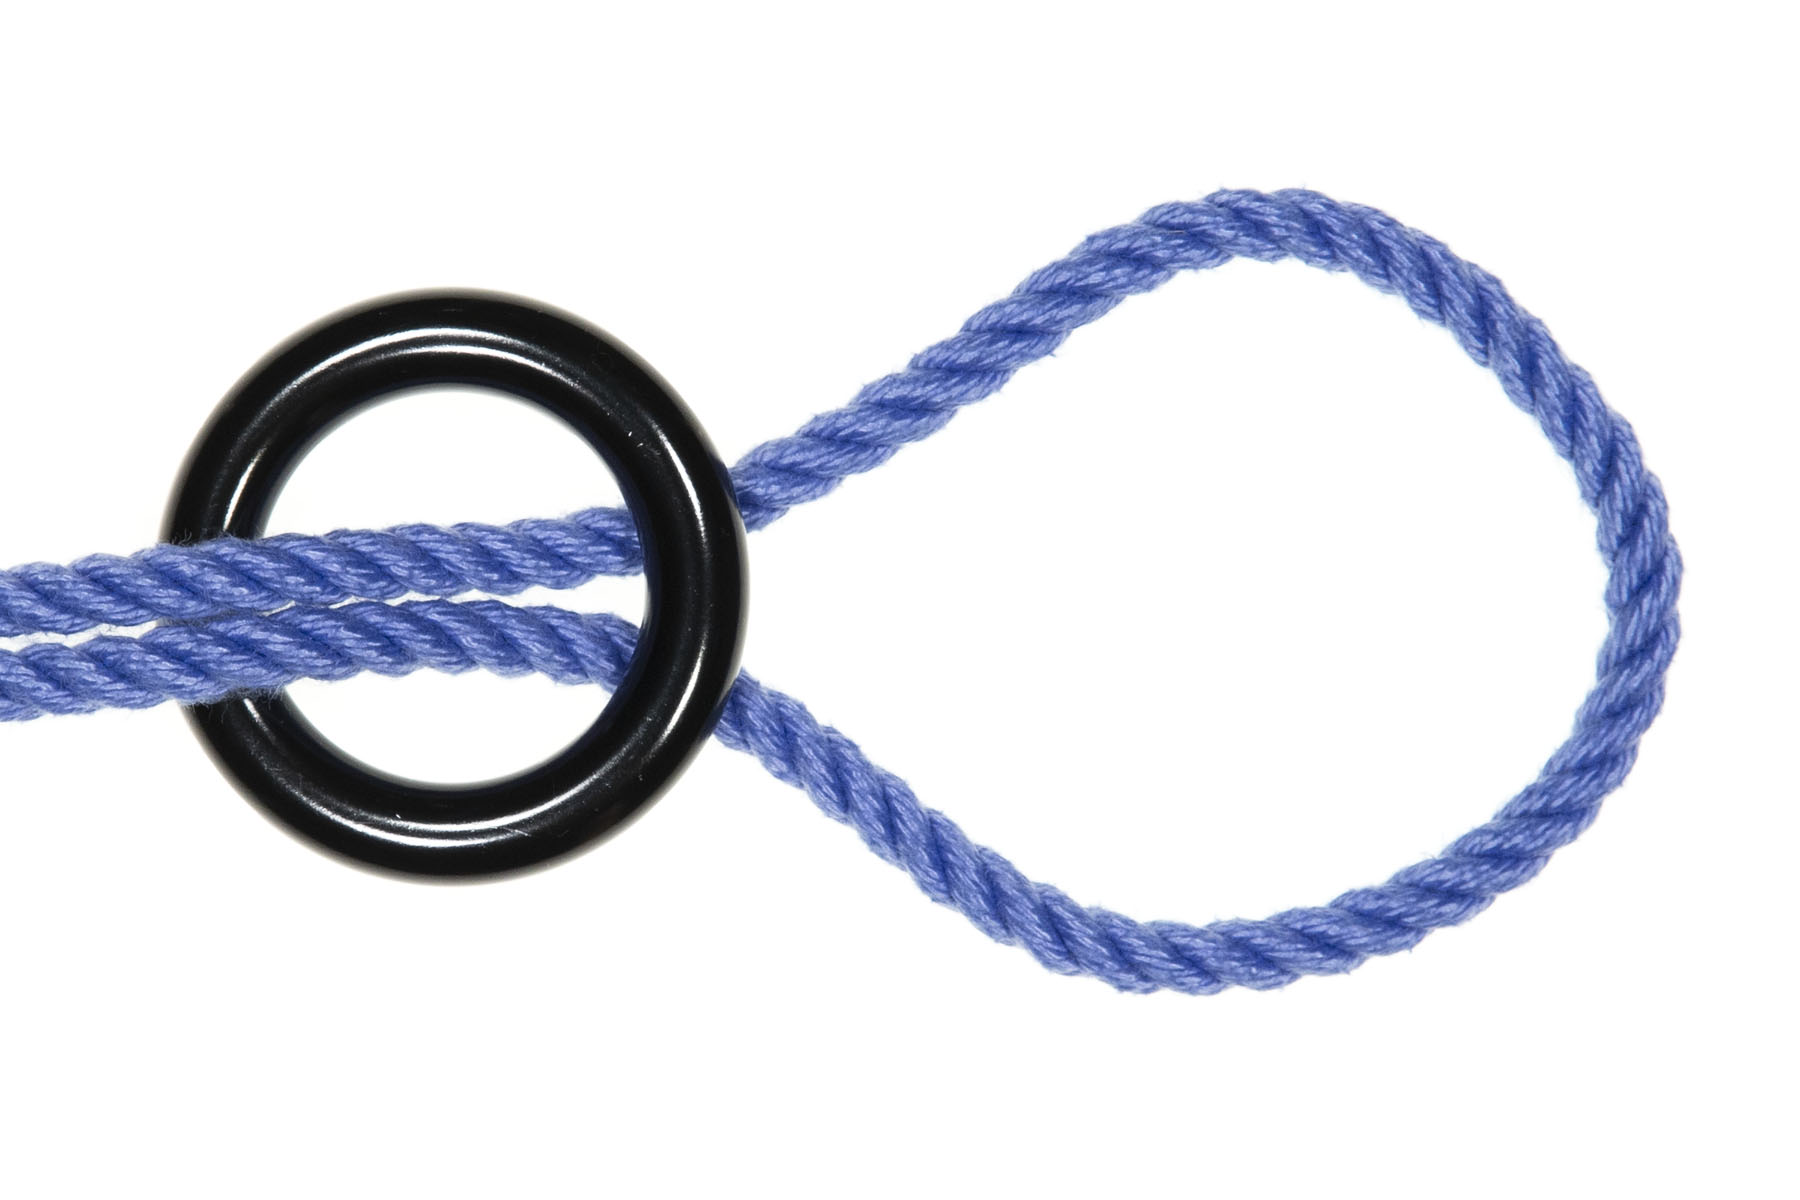 The bight of the rope has been expanded to make a loop that is four inches in diameter.